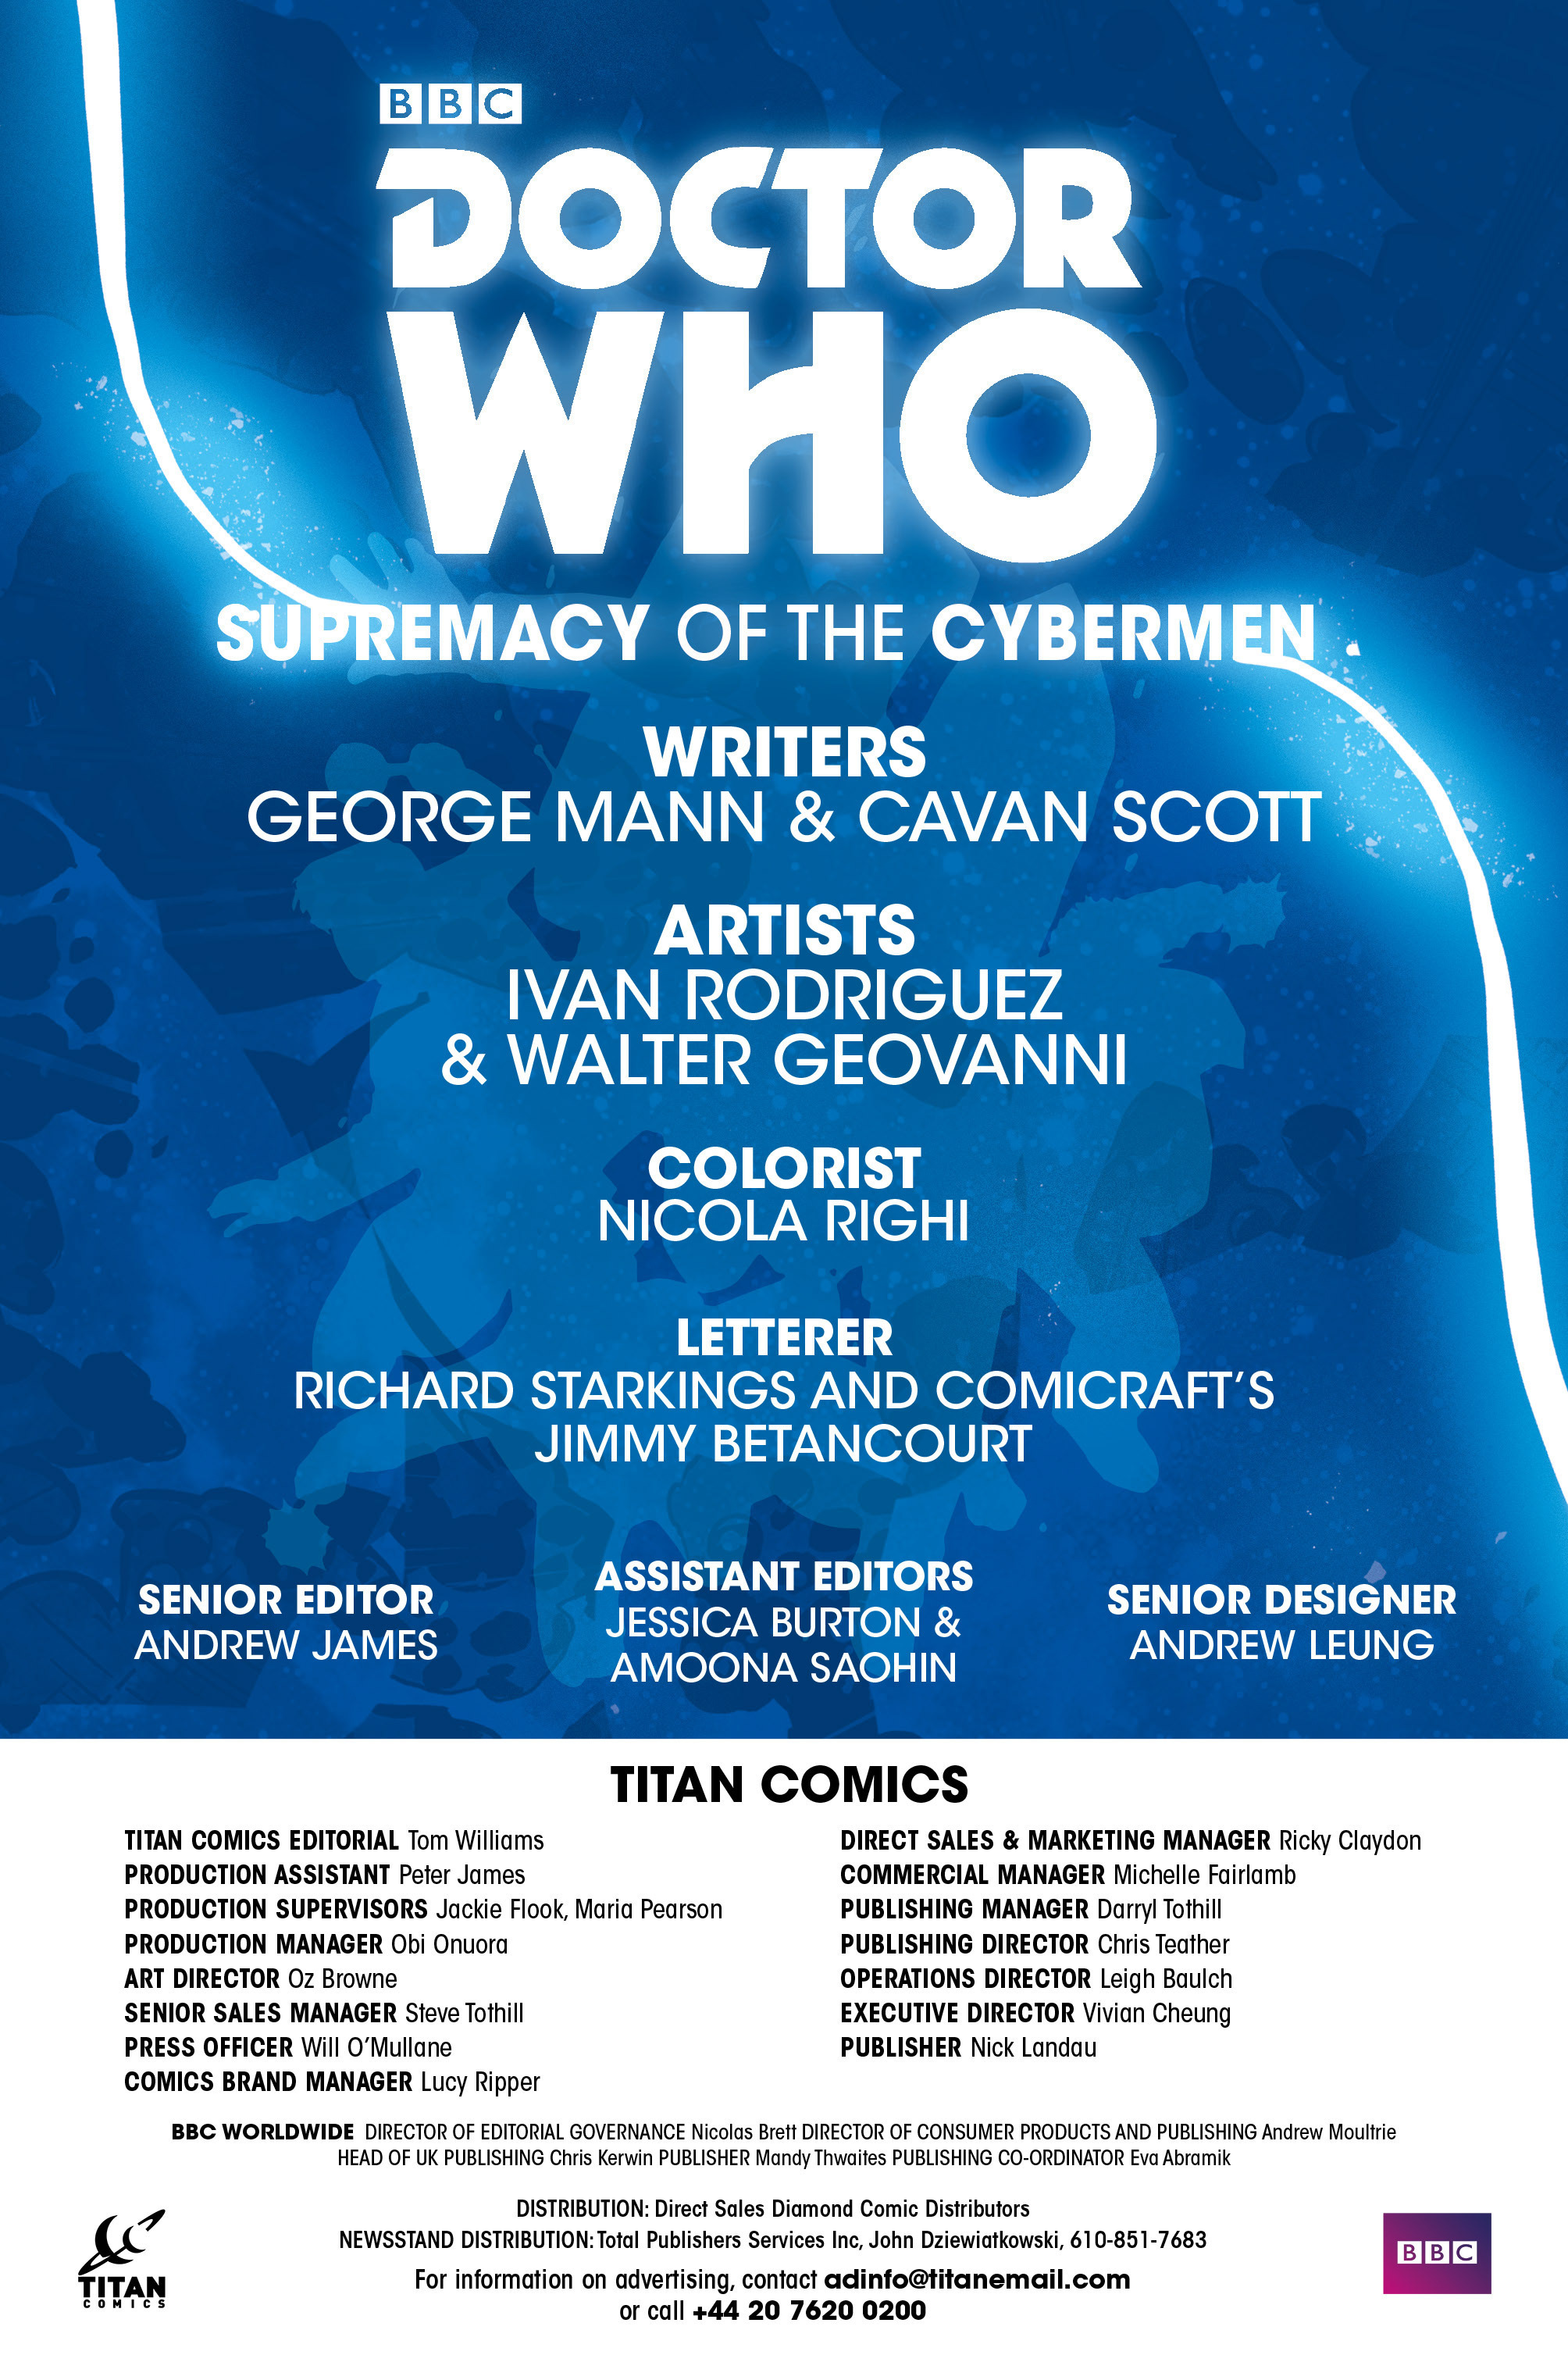 Read online Doctor Who Event 2016: Doctor Who Supremacy of the Cybermen comic -  Issue #3 - 6